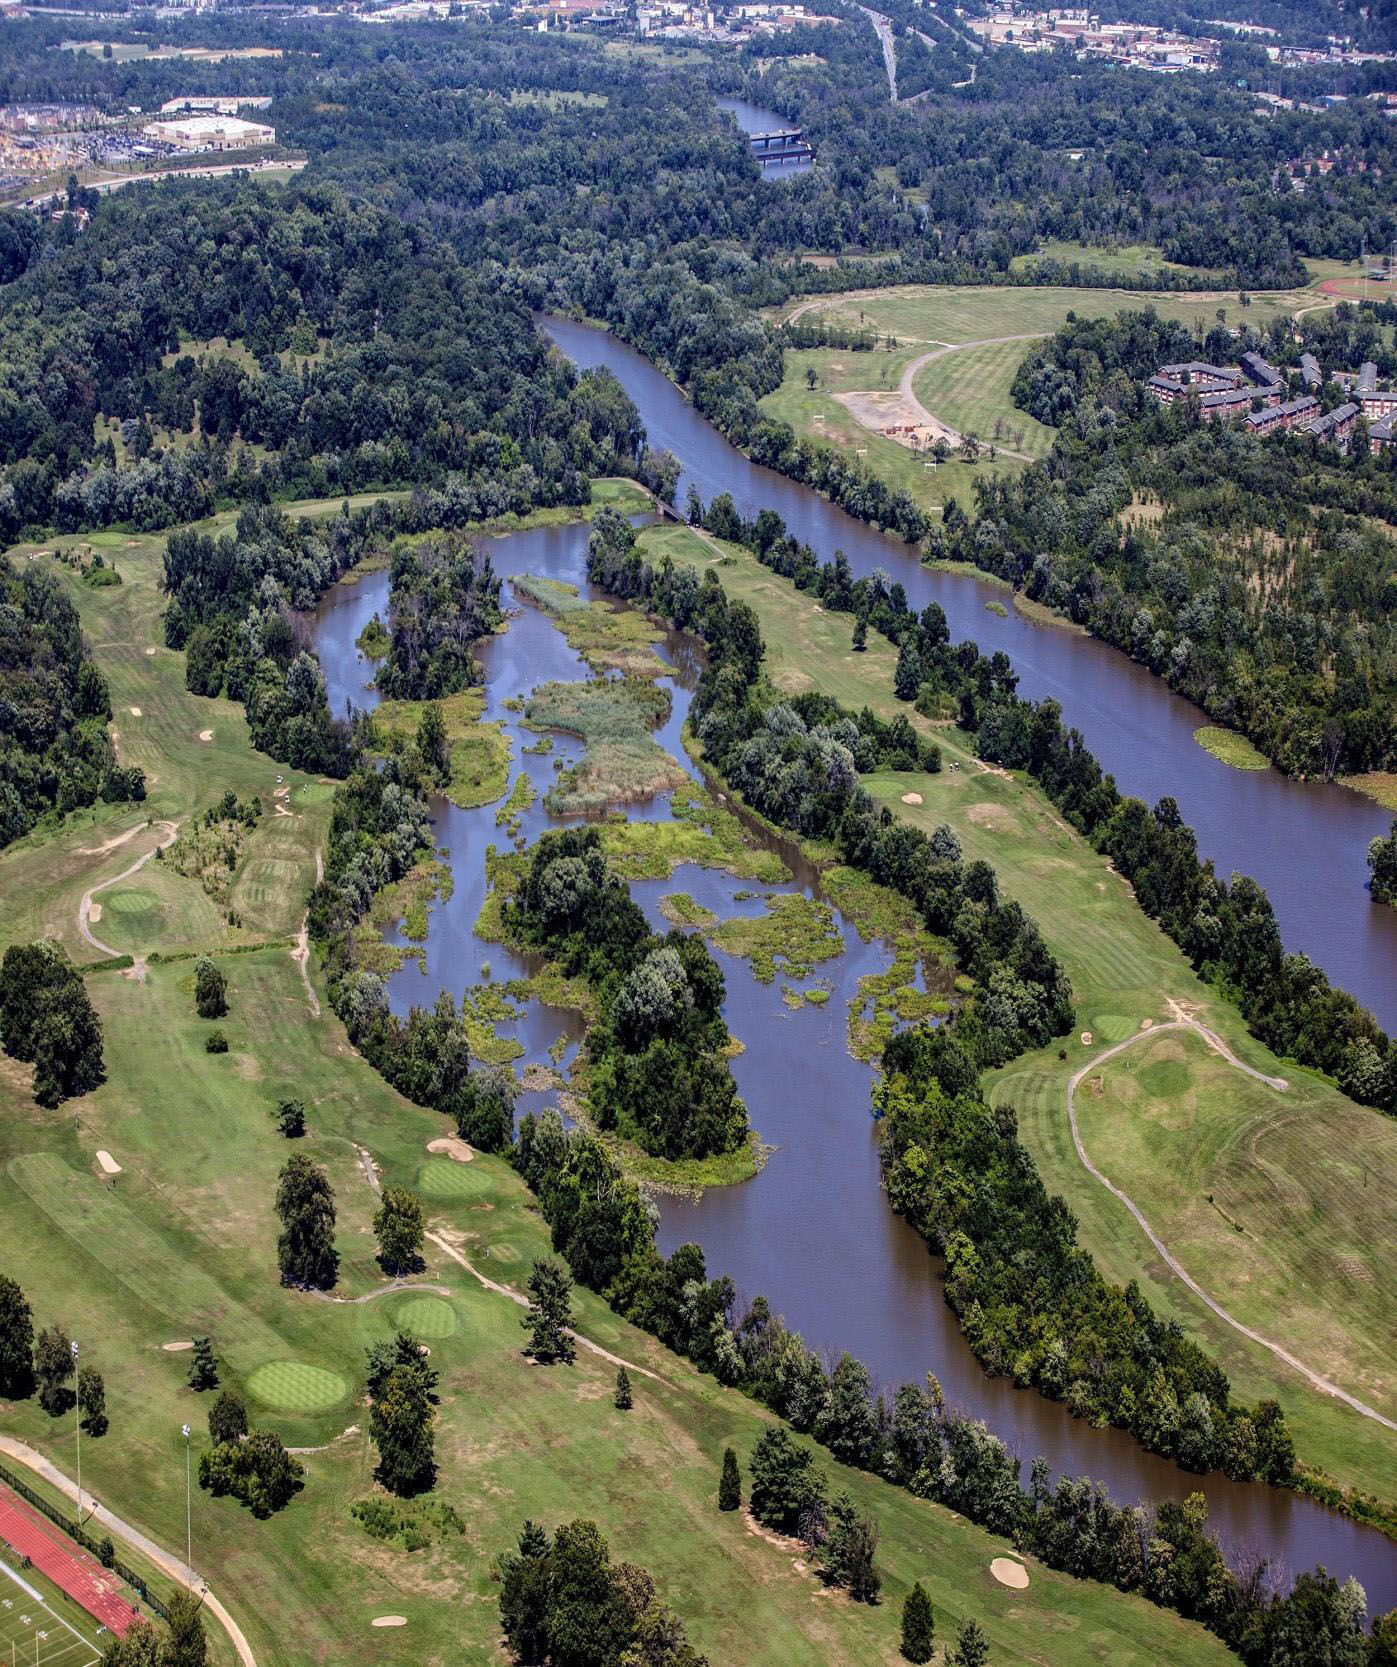 An aerial view of the Langston Golf Course on the Anacostia River.